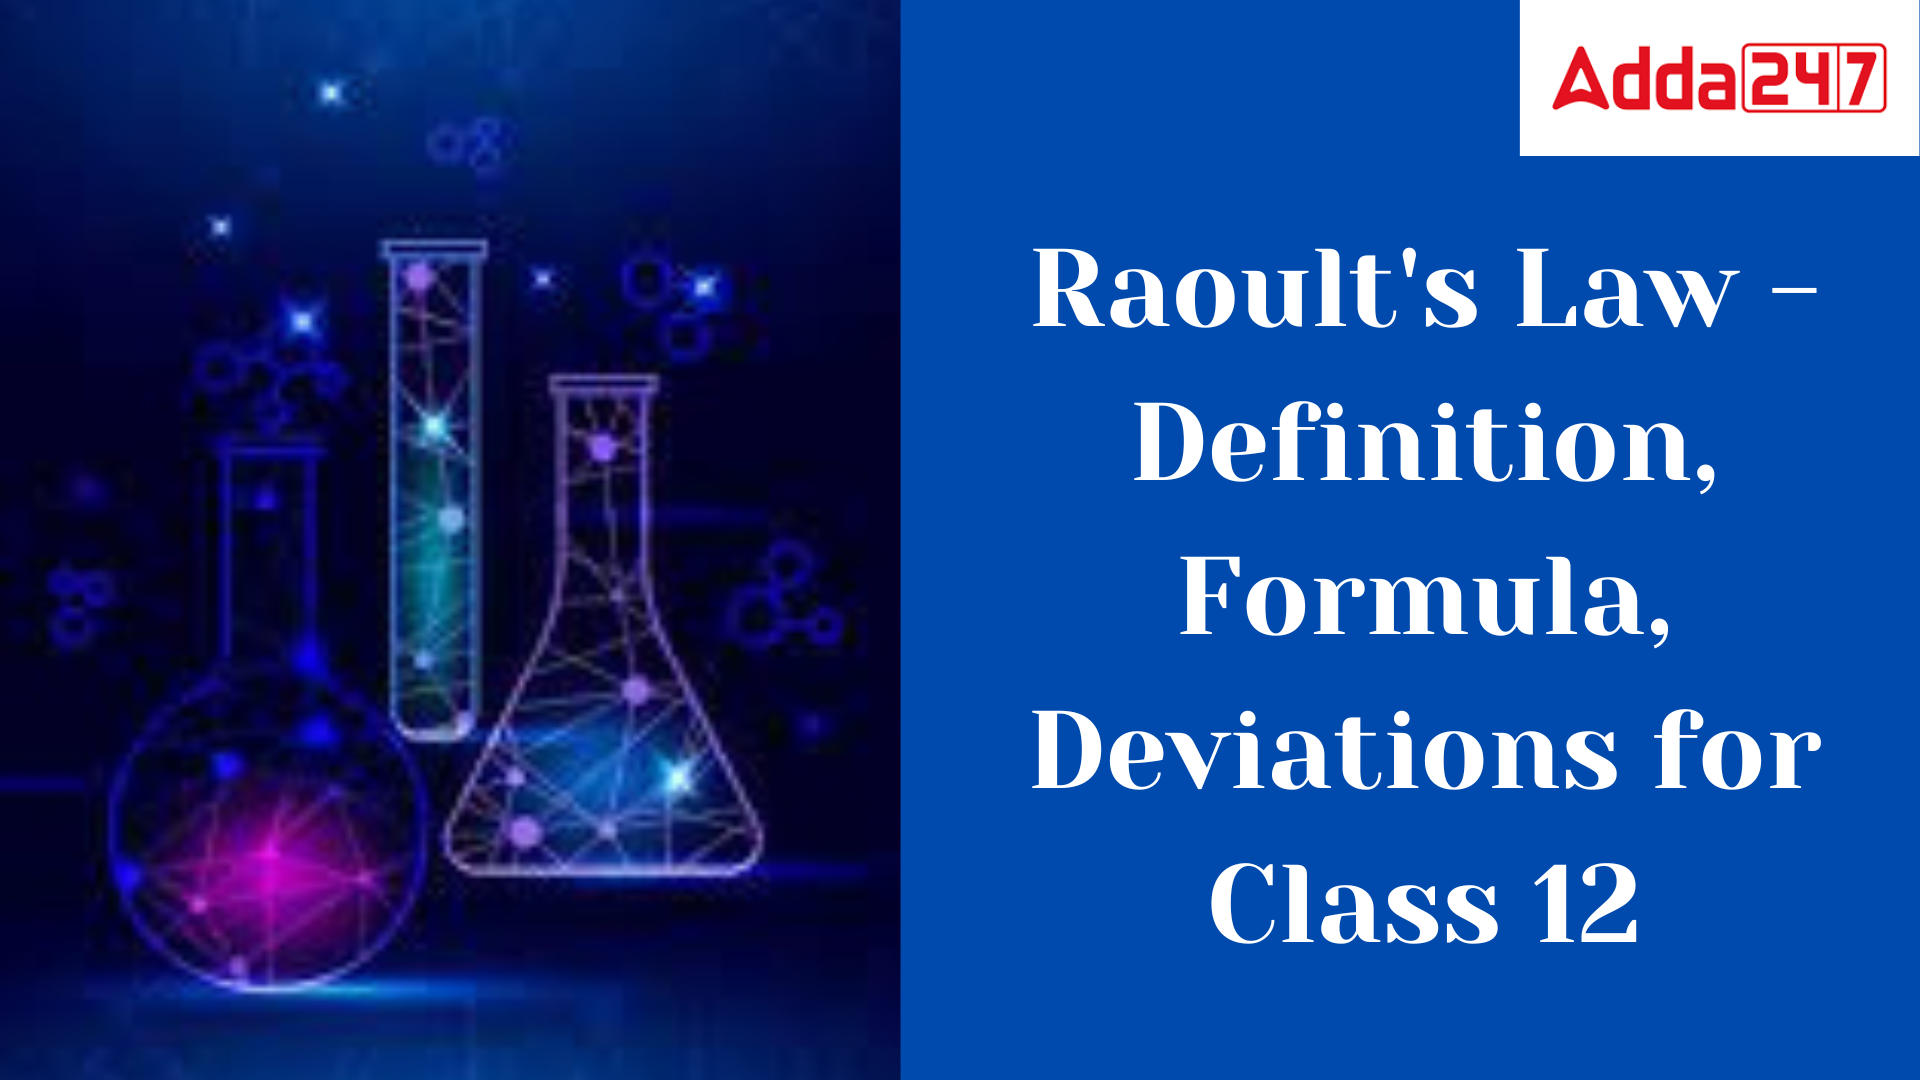 Raoult's Law - Definition, Formula, Deviations for Class 12